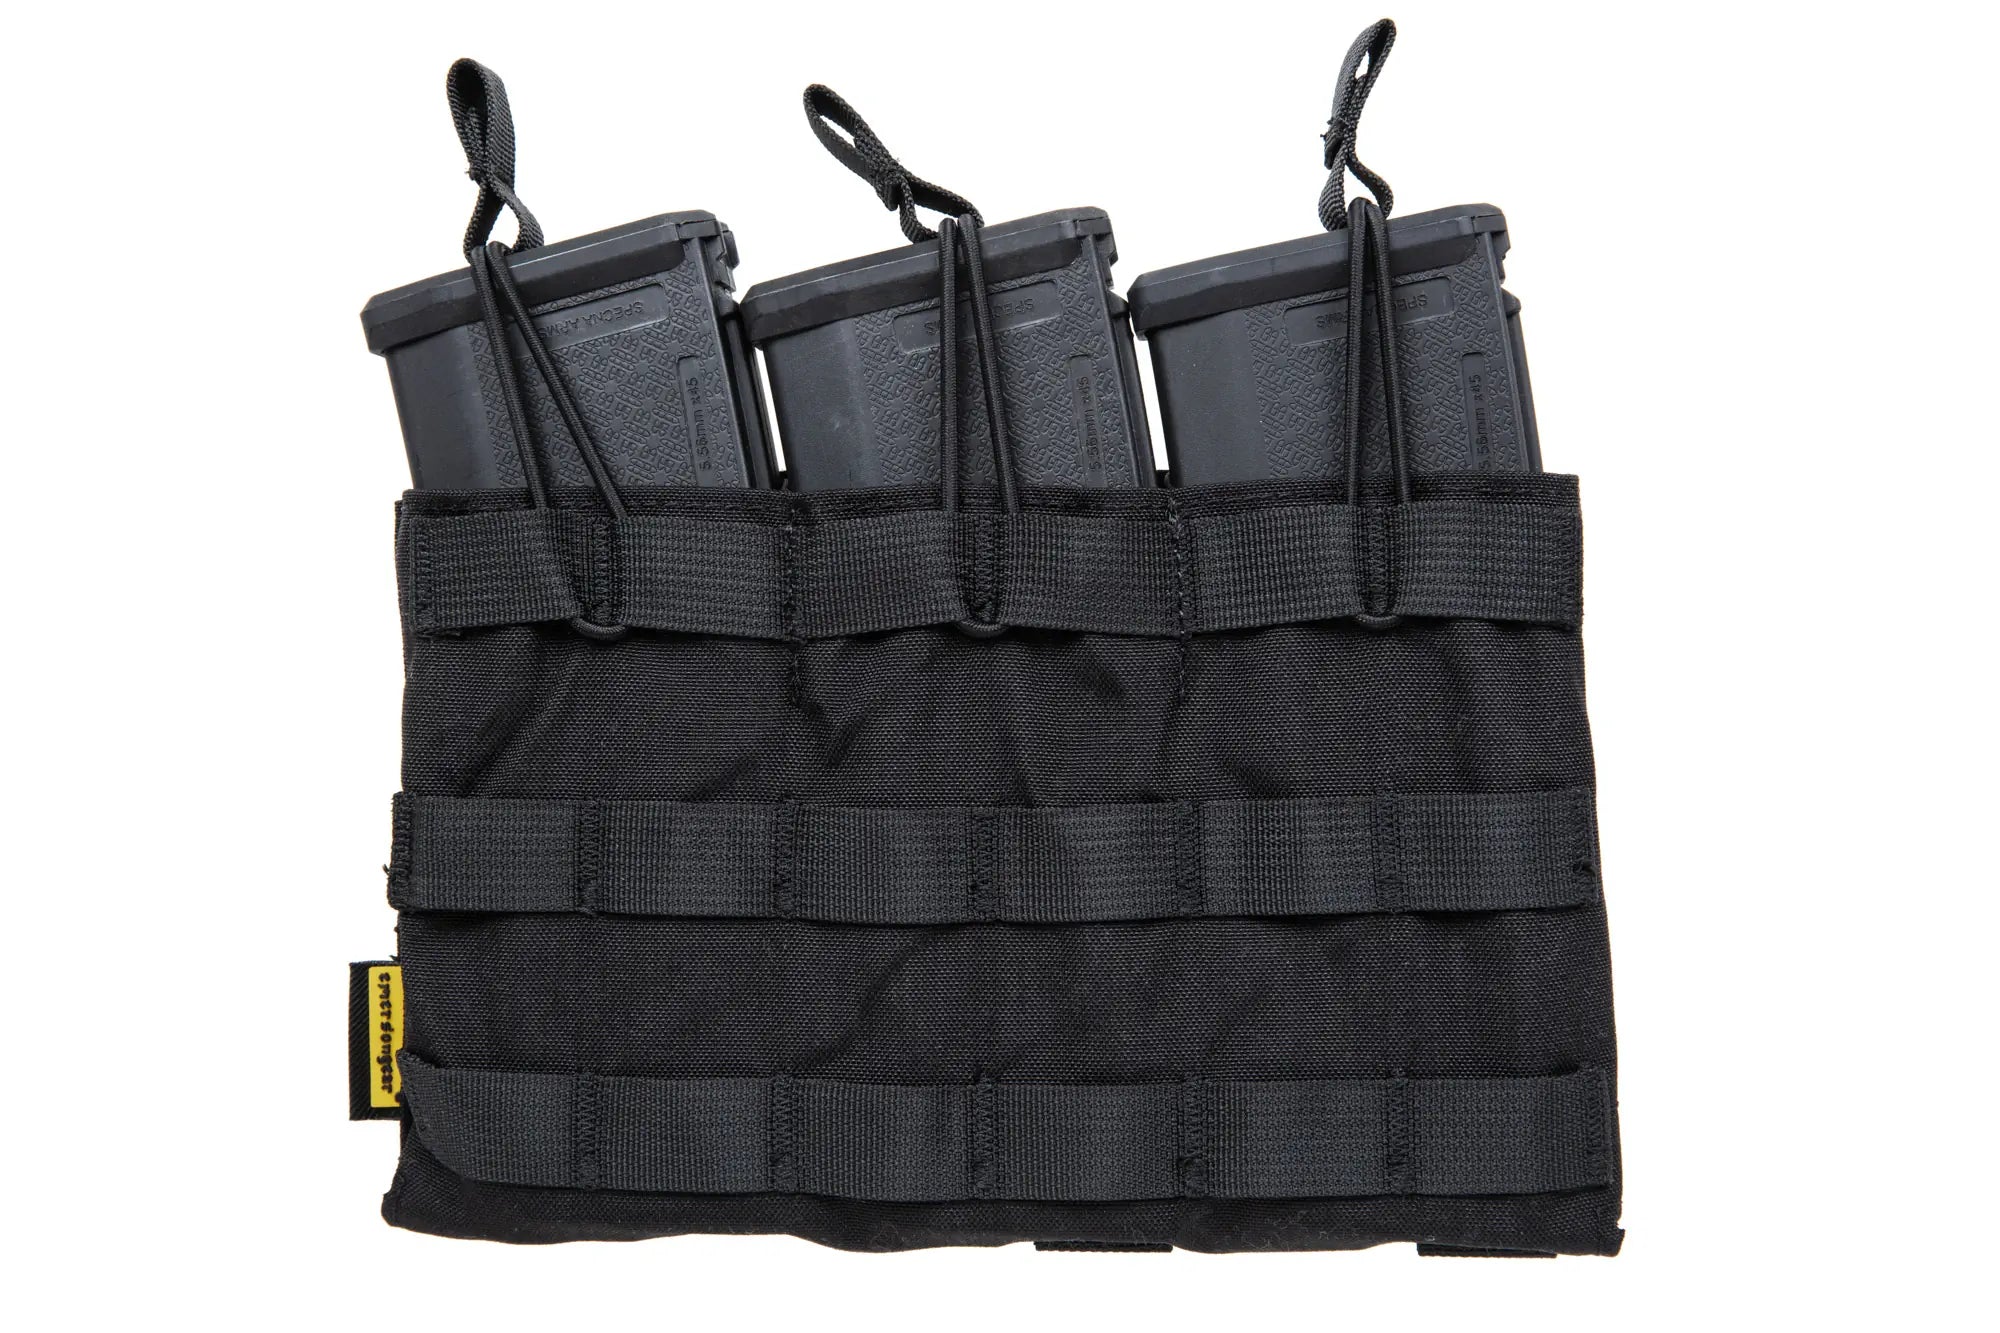 Triple open type loader for M4/M16 magazines Emerson Gear Black